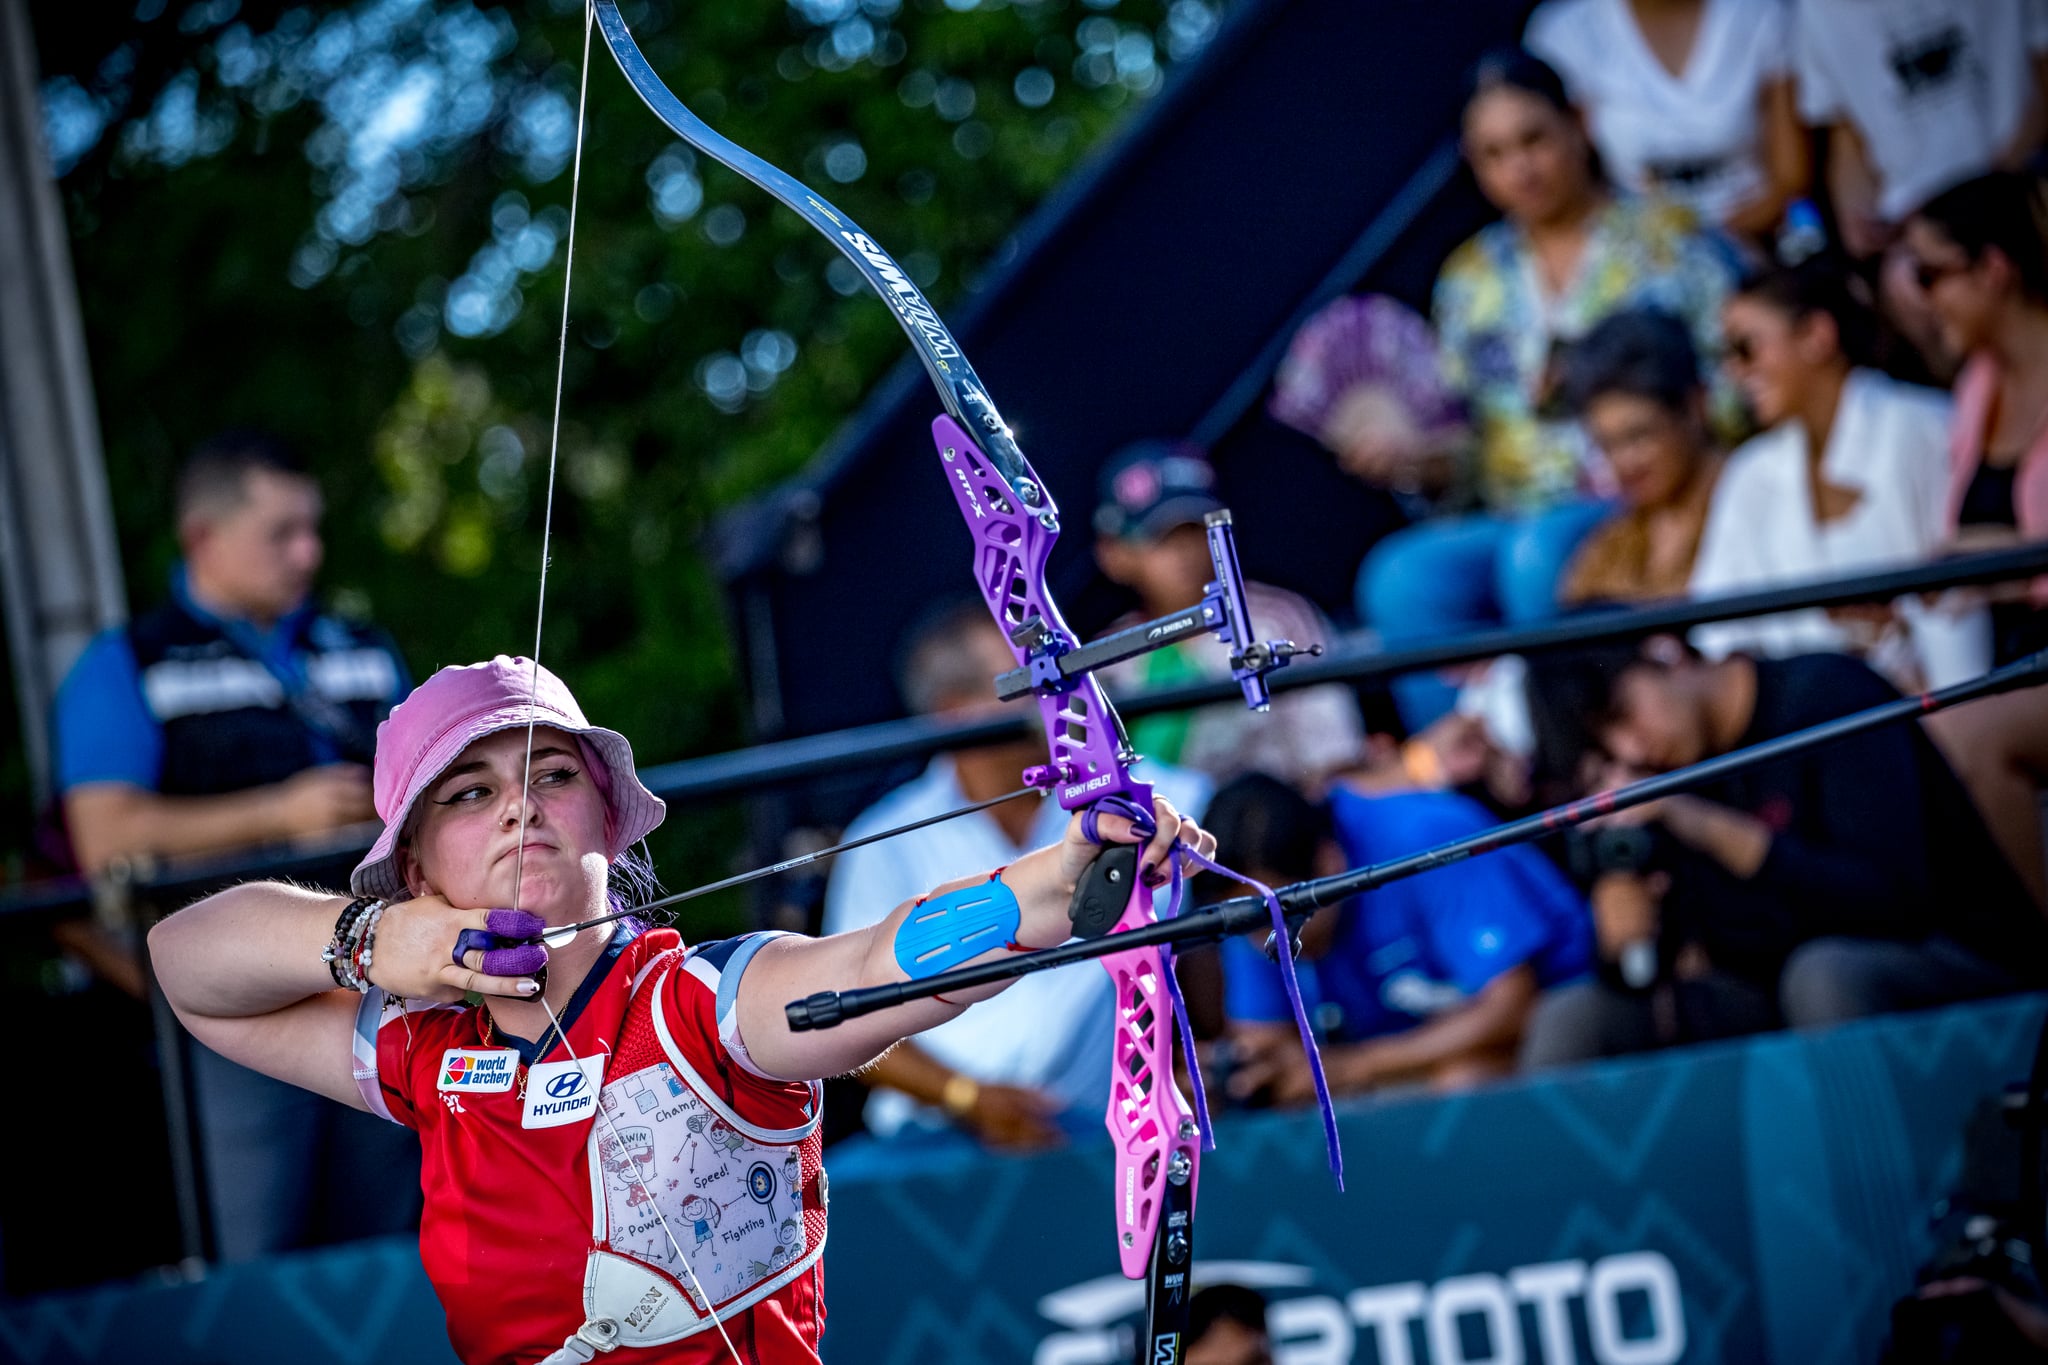 HERMOSILLO, MEXICO - SEPTEMBER 10: In this handout image provided by the World Archery Federation, Penny Healey of Great Britain during the Women's recurve finals during the Hyundai Archery World Cup Finals 2023 on September 10, 2023 in Hermosillo, Mexico. (Photo by Dean Alberga/Handout/World Archery Federation via Getty Images )